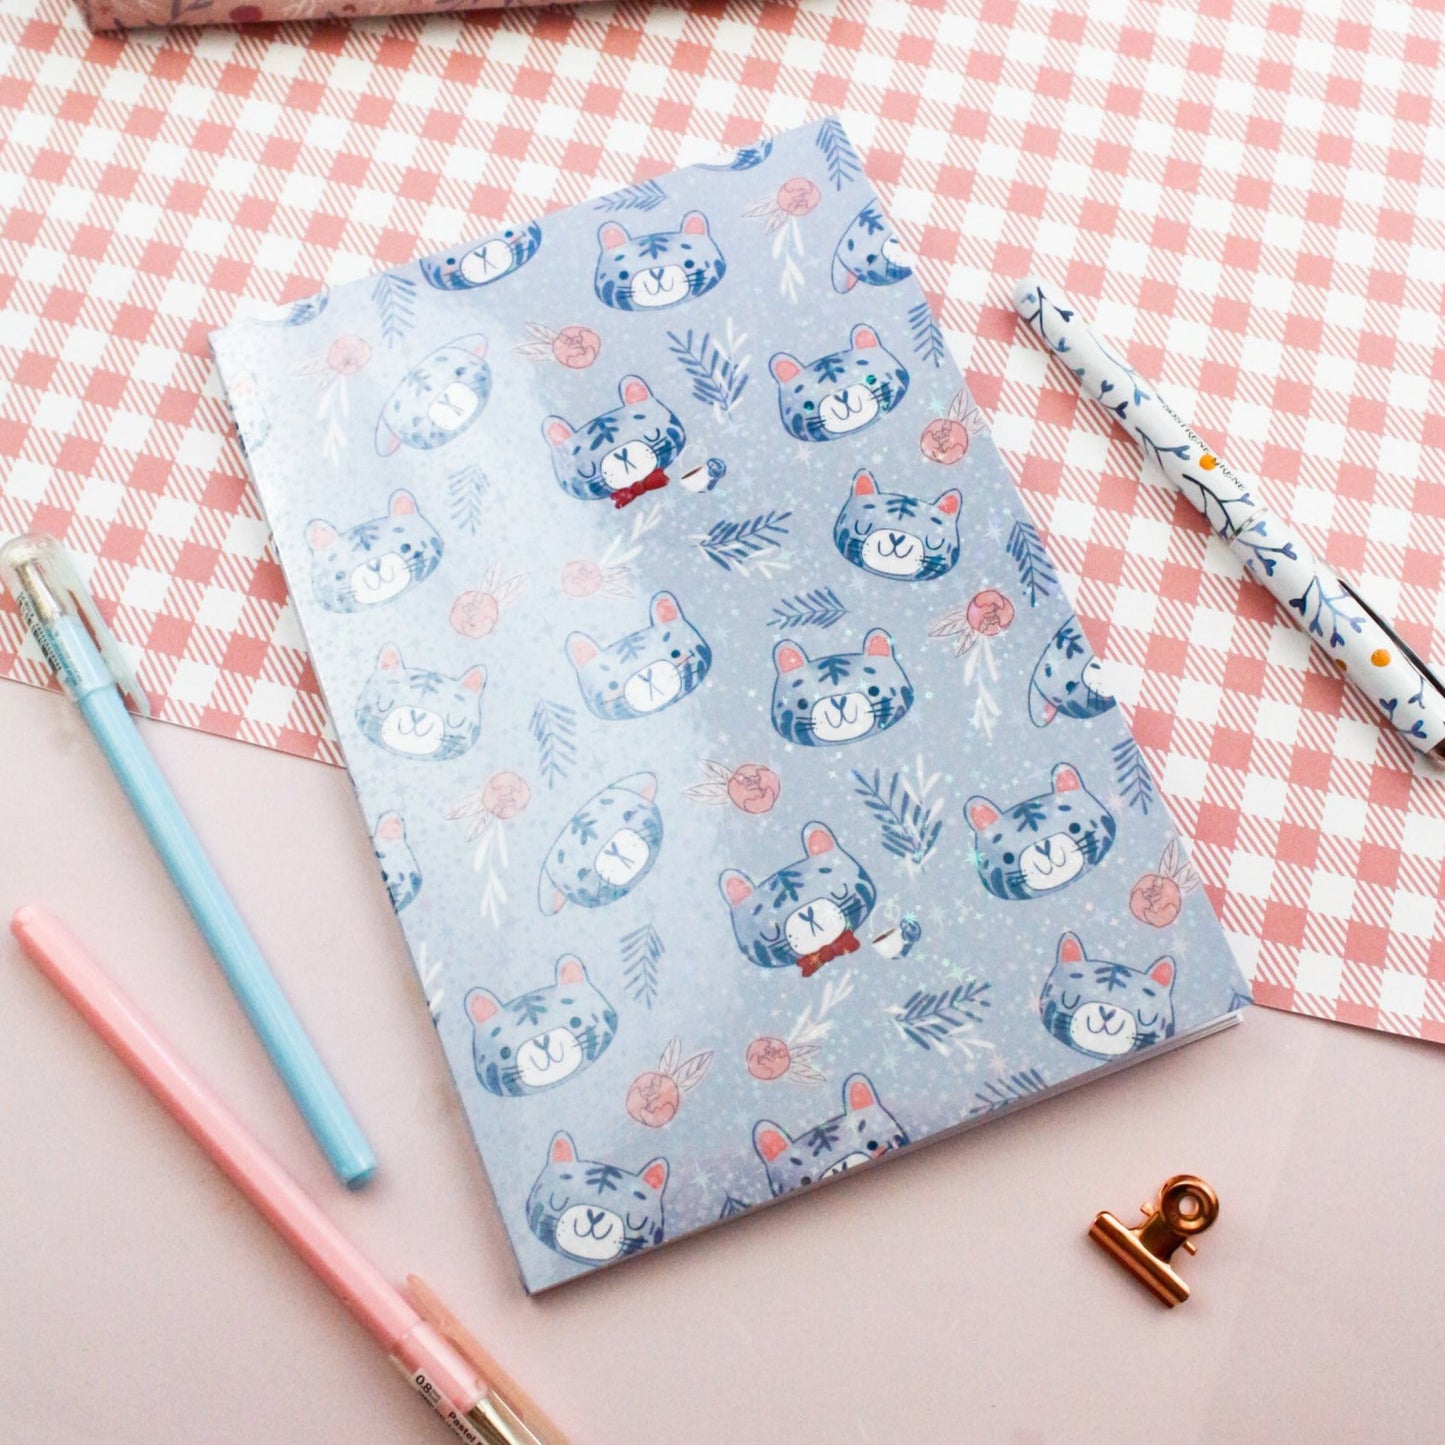 DISCONTINUED - Tiger Holographic Notebook - Cute notebooks